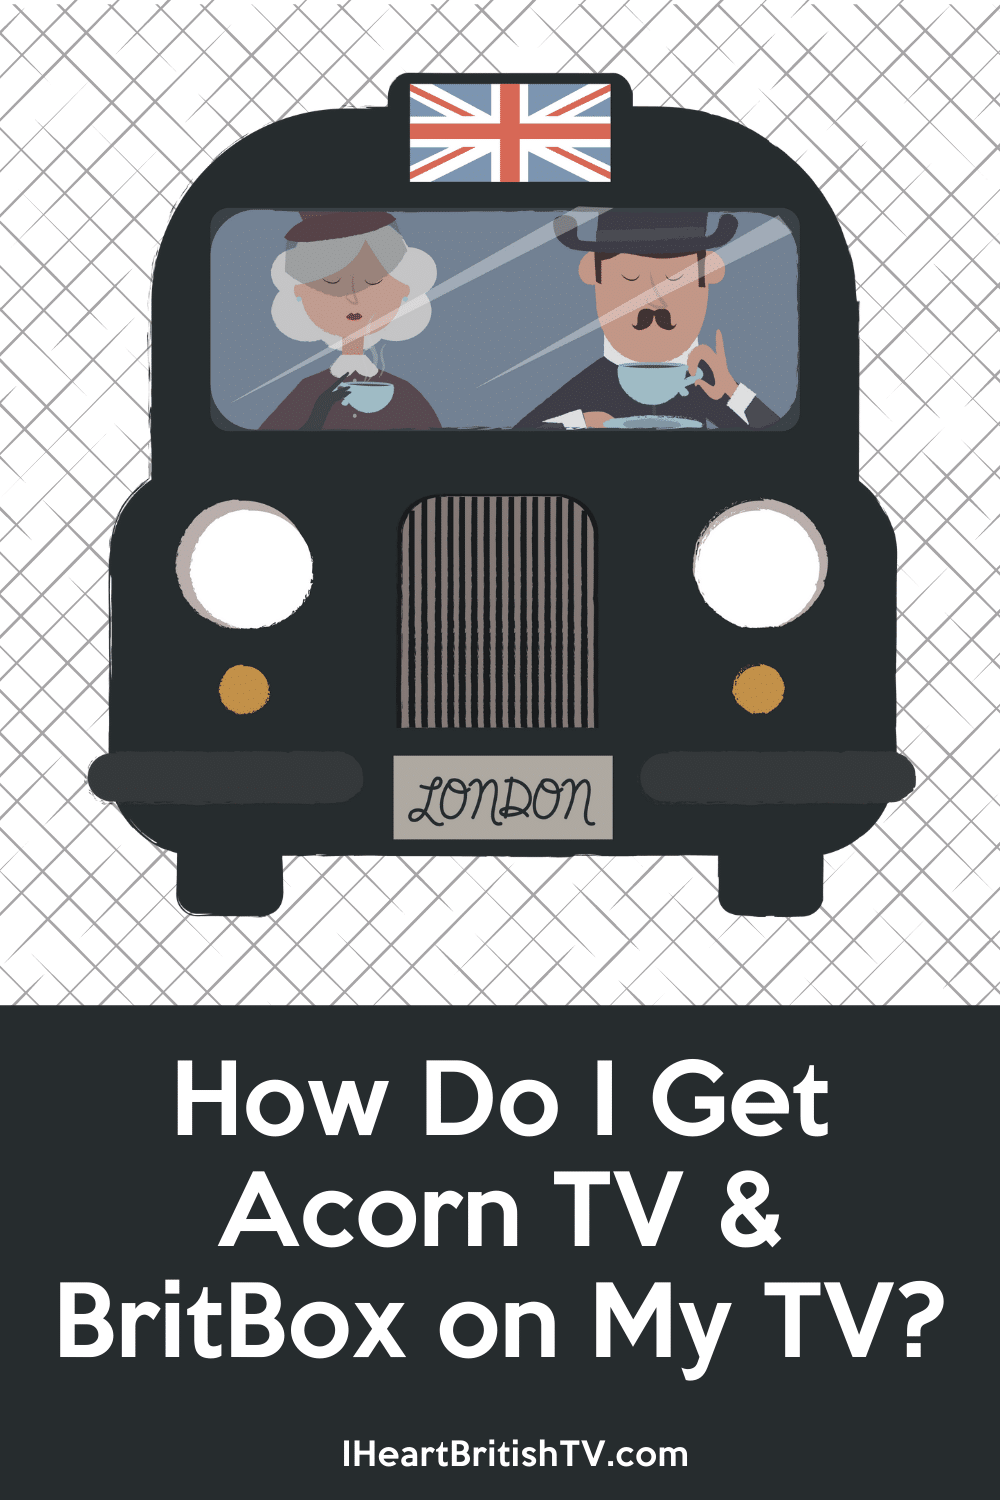 How Do I Get Acorn TV or BritBox on My TV?